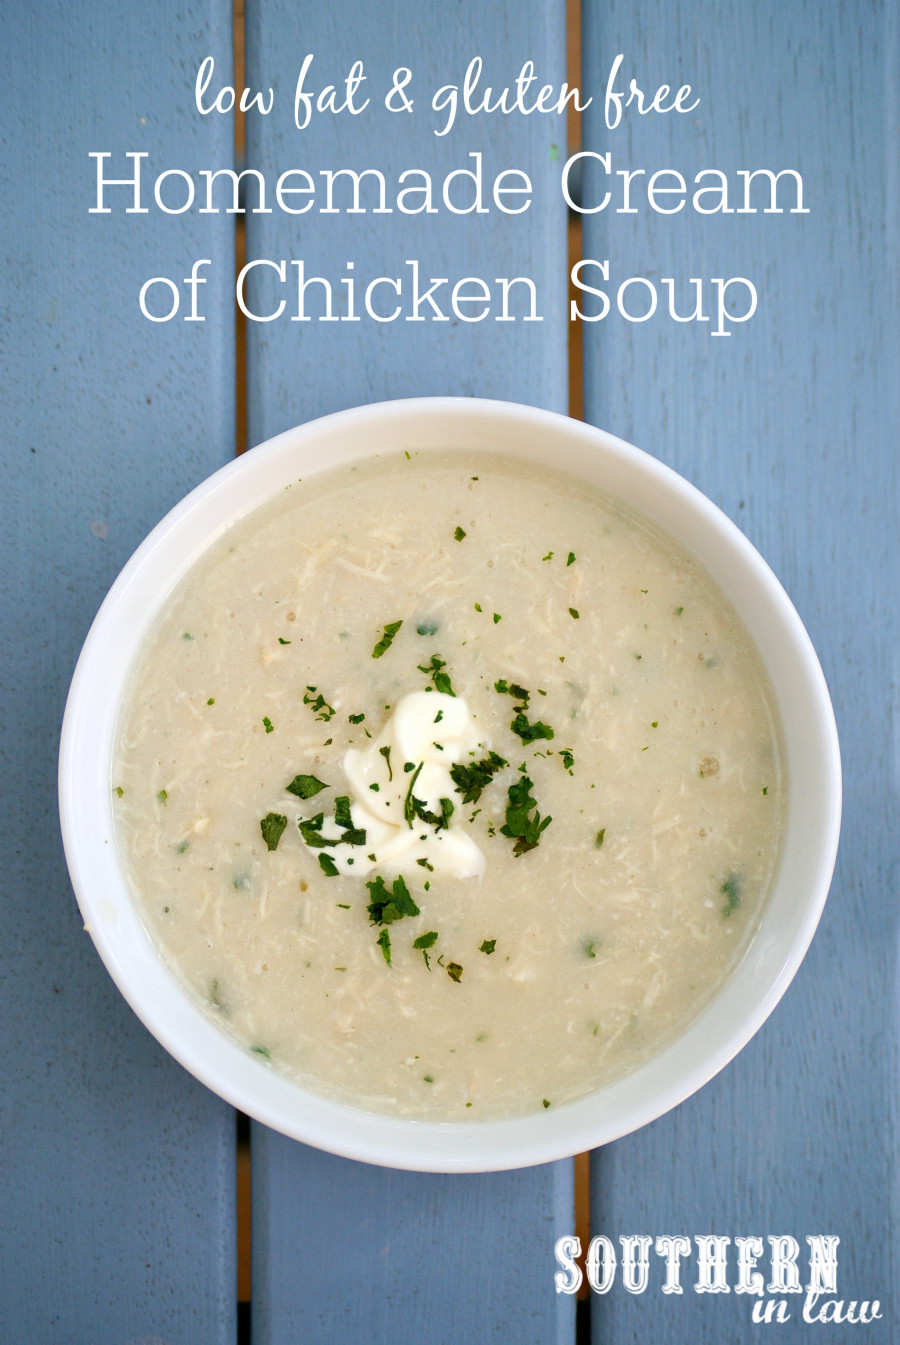 Low Calorie Chicken Soup Recipes
 Southern In Law Recipe Gluten Free Homemade Cream of